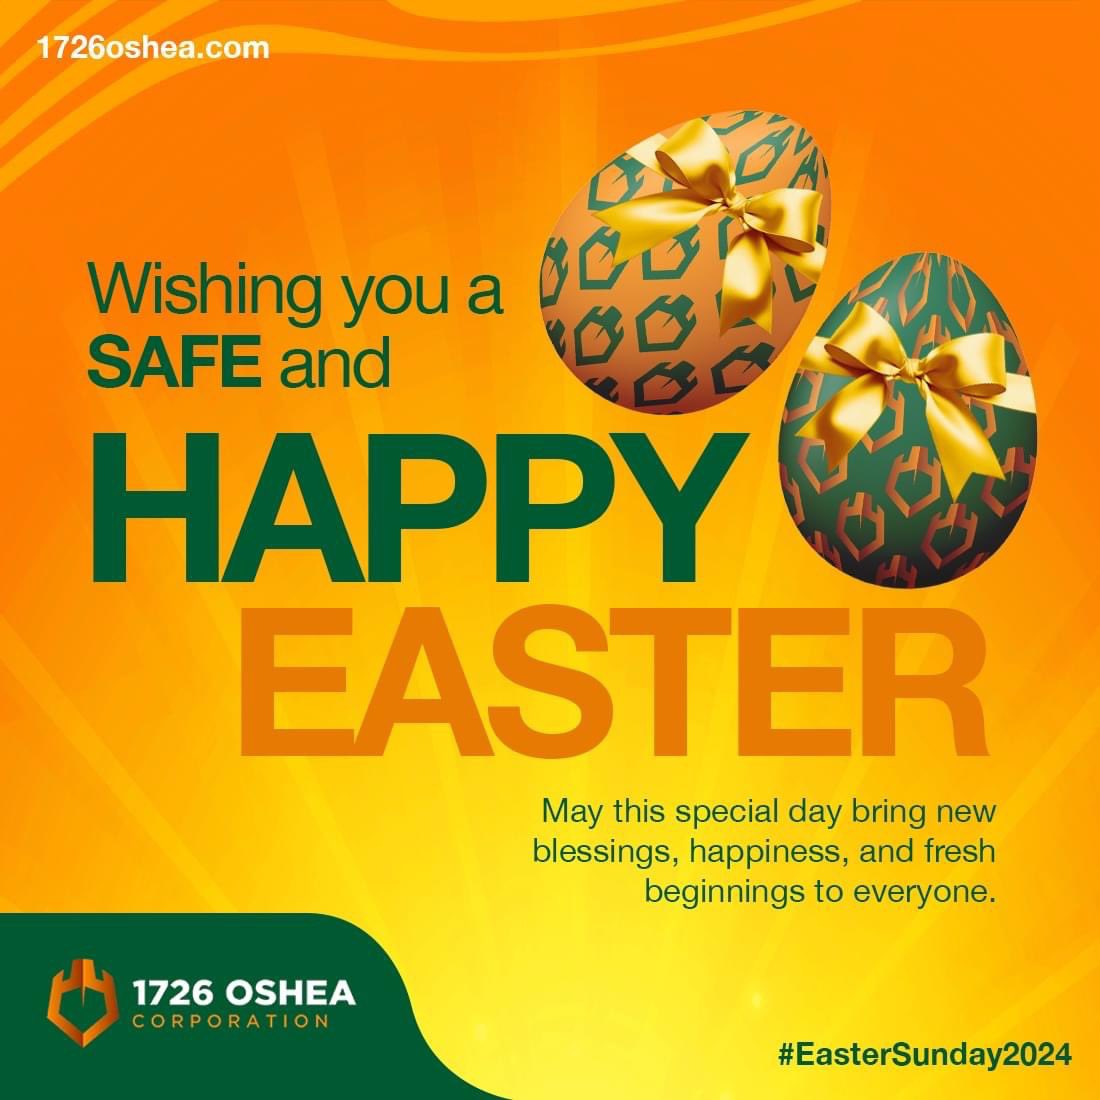 🐣 Happy Easter from all of us at 1726 OSHEA Corporation! 🐰
--
#easter2024 #SafetyFirst #OccupationalHealth #ZeroHarm #SafetyOfficer1 #ProtectAndServe #WorkplaceSafety #SafetyCulture #EmpowerToProtect #SafetyLeadership #OSHTraining #RiskPrevention #HealthAndSafety #SafeWorkplace